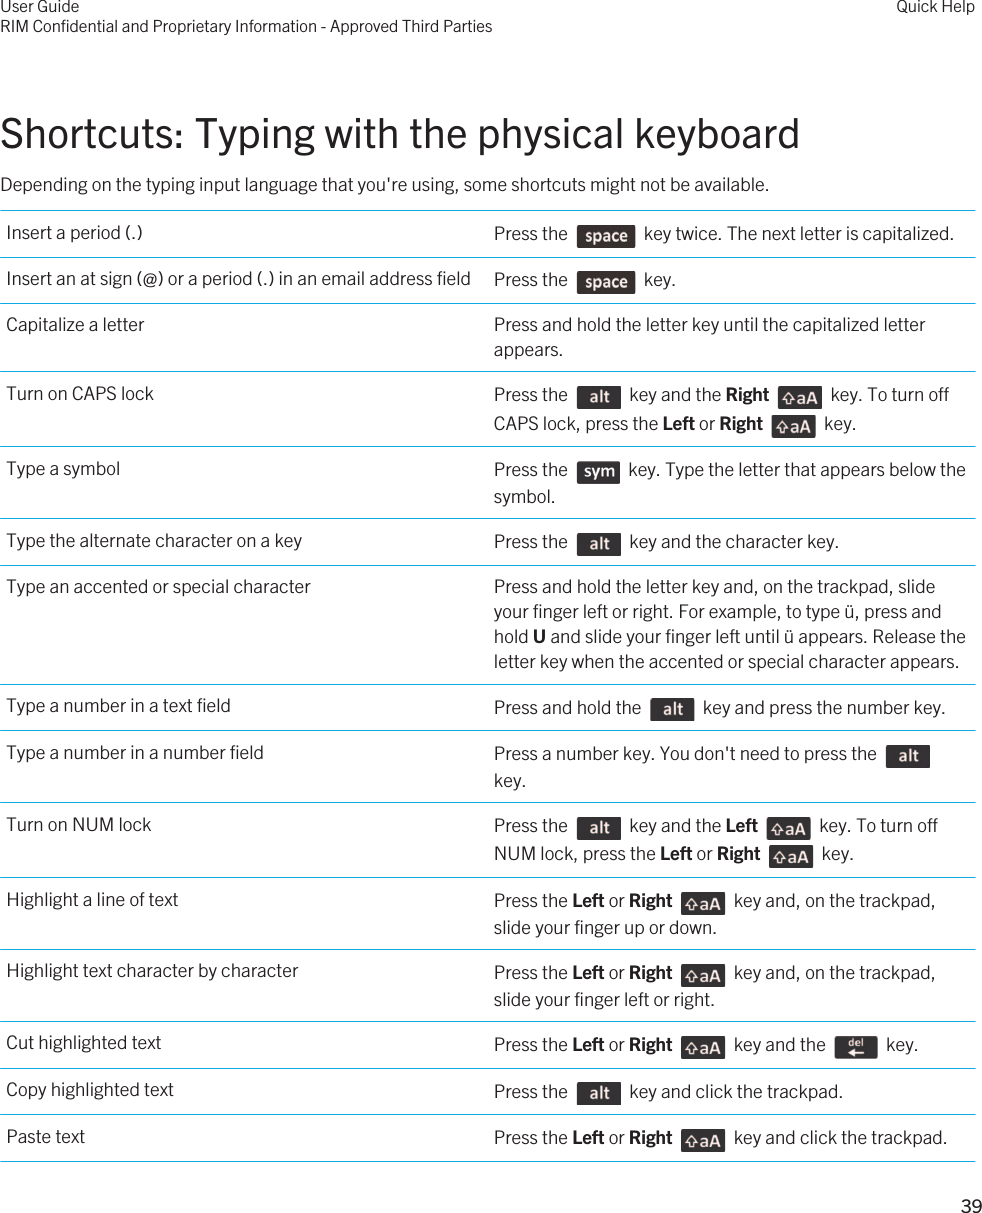 Shortcuts: Typing with the physical keyboardDepending on the typing input language that you&apos;re using, some shortcuts might not be available.Insert a period (.) Press the    key twice. The next letter is capitalized.Insert an at sign (@) or a period (.) in an email address field Press the    key.Capitalize a letter Press and hold the letter key until the capitalized letter appears.Turn on CAPS lock Press the    key and the Right    key. To turn off CAPS lock, press the Left or Right    key.Type a symbol Press the    key. Type the letter that appears below the symbol.Type the alternate character on a key Press the    key and the character key.Type an accented or special character Press and hold the letter key and, on the trackpad, slide your finger left or right. For example, to type ü, press and hold U and slide your finger left until ü appears. Release the letter key when the accented or special character appears.Type a number in a text field Press and hold the    key and press the number key.Type a number in a number field Press a number key. You don&apos;t need to press the key.Turn on NUM lock Press the    key and the Left    key. To turn off NUM lock, press the Left or Right    key.Highlight a line of text Press the Left or Right    key and, on the trackpad, slide your finger up or down.Highlight text character by character Press the Left or Right    key and, on the trackpad, slide your finger left or right.Cut highlighted text Press the Left or Right    key and the    key.Copy highlighted text Press the    key and click the trackpad.Paste text Press the Left or Right    key and click the trackpad.User GuideRIM Confidential and Proprietary Information - Approved Third PartiesQuick Help39 